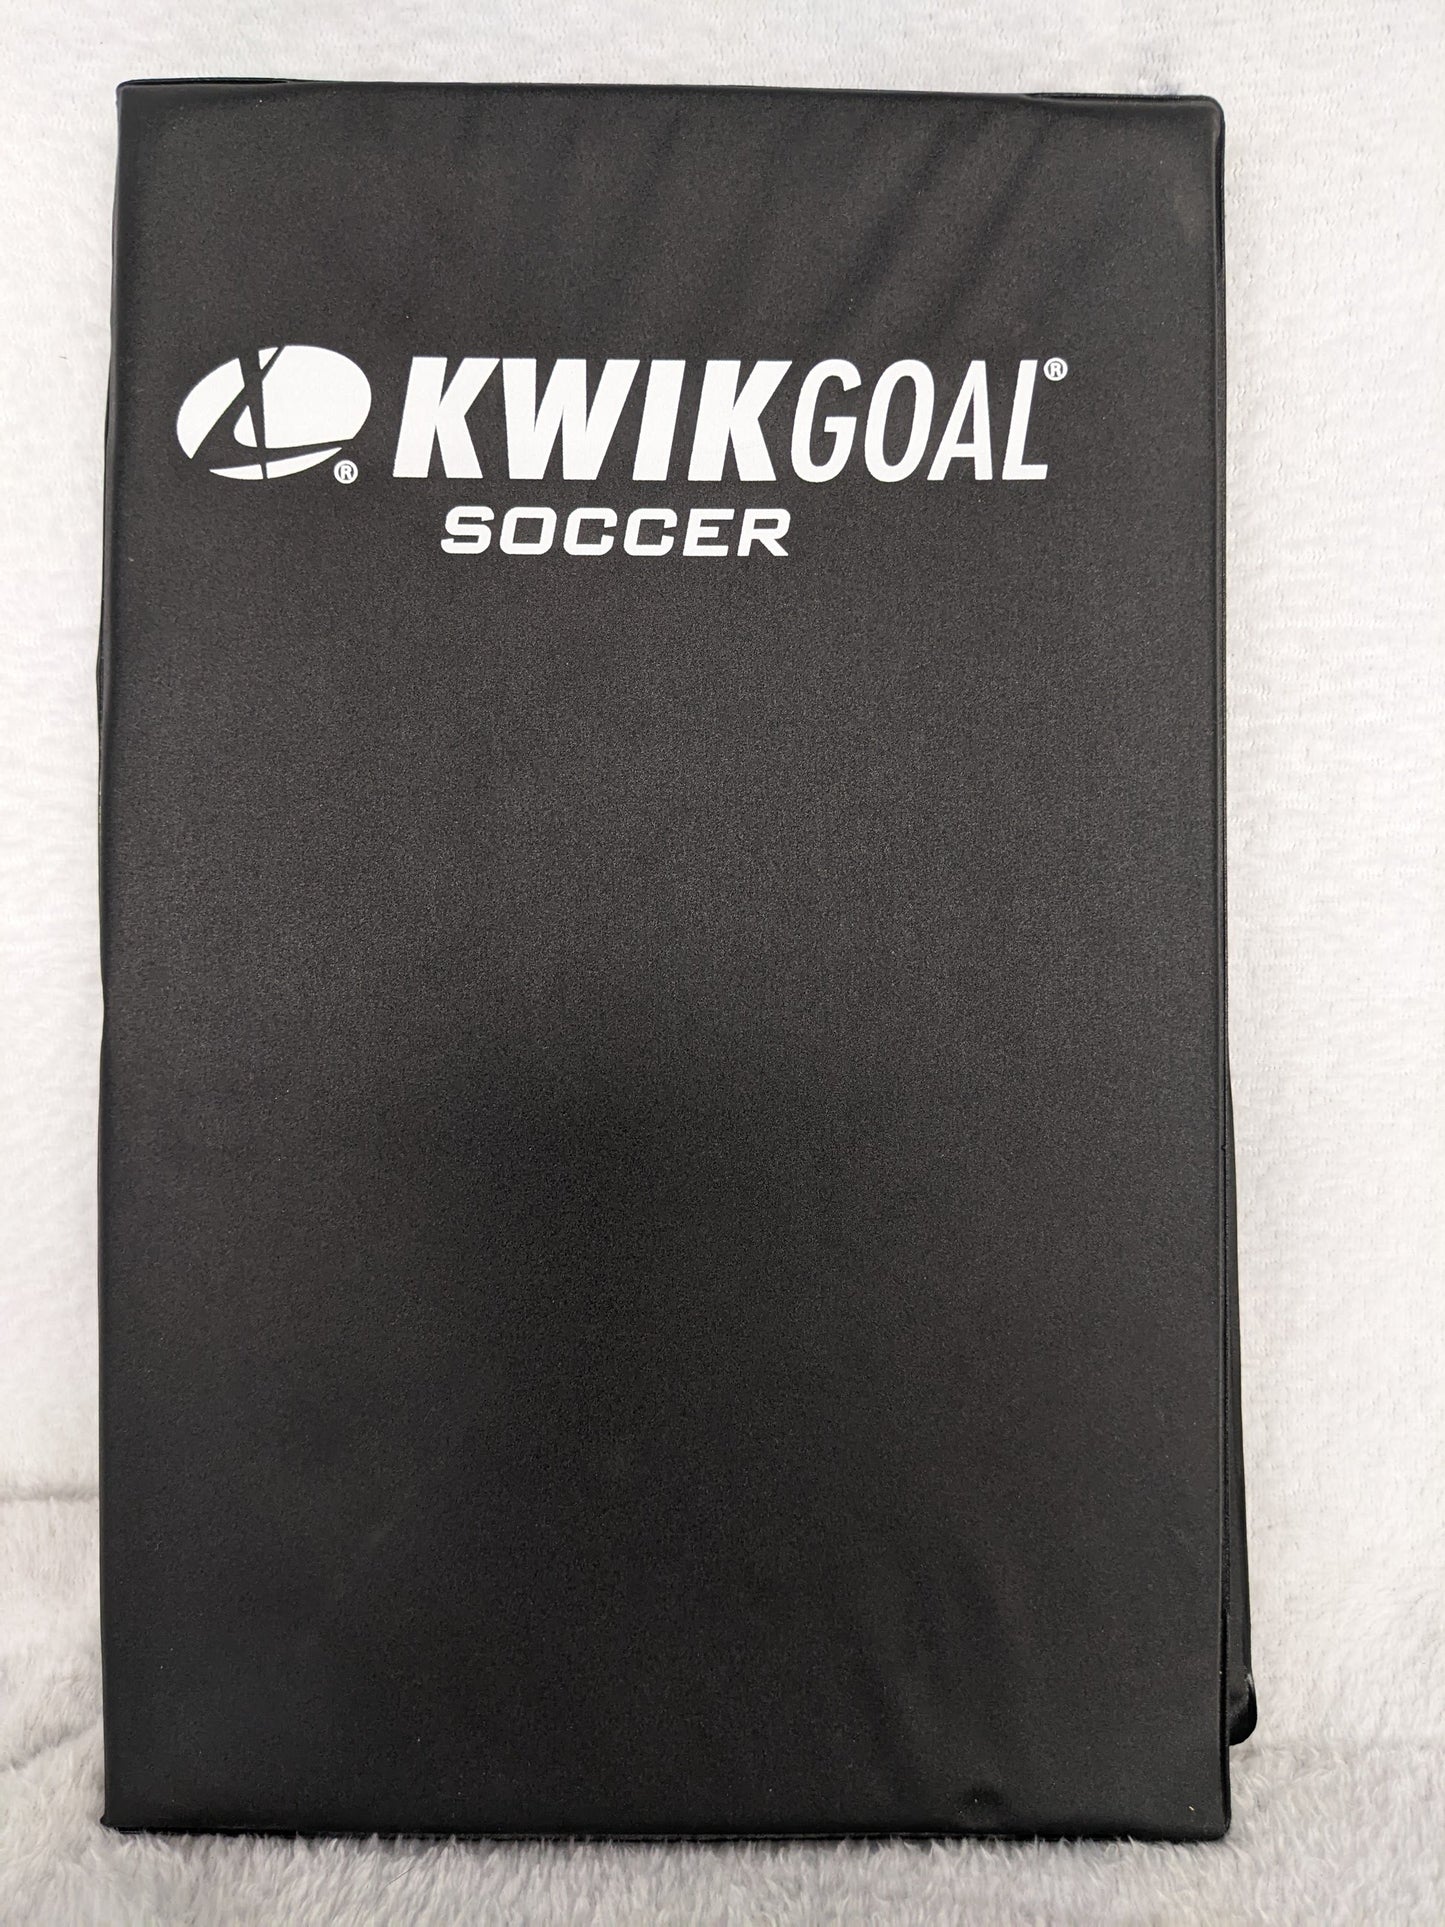 KwikGoal Coach's Dry Erase Board and Practice Session Planner Size 14 In x 9 In Color Black Condition Used